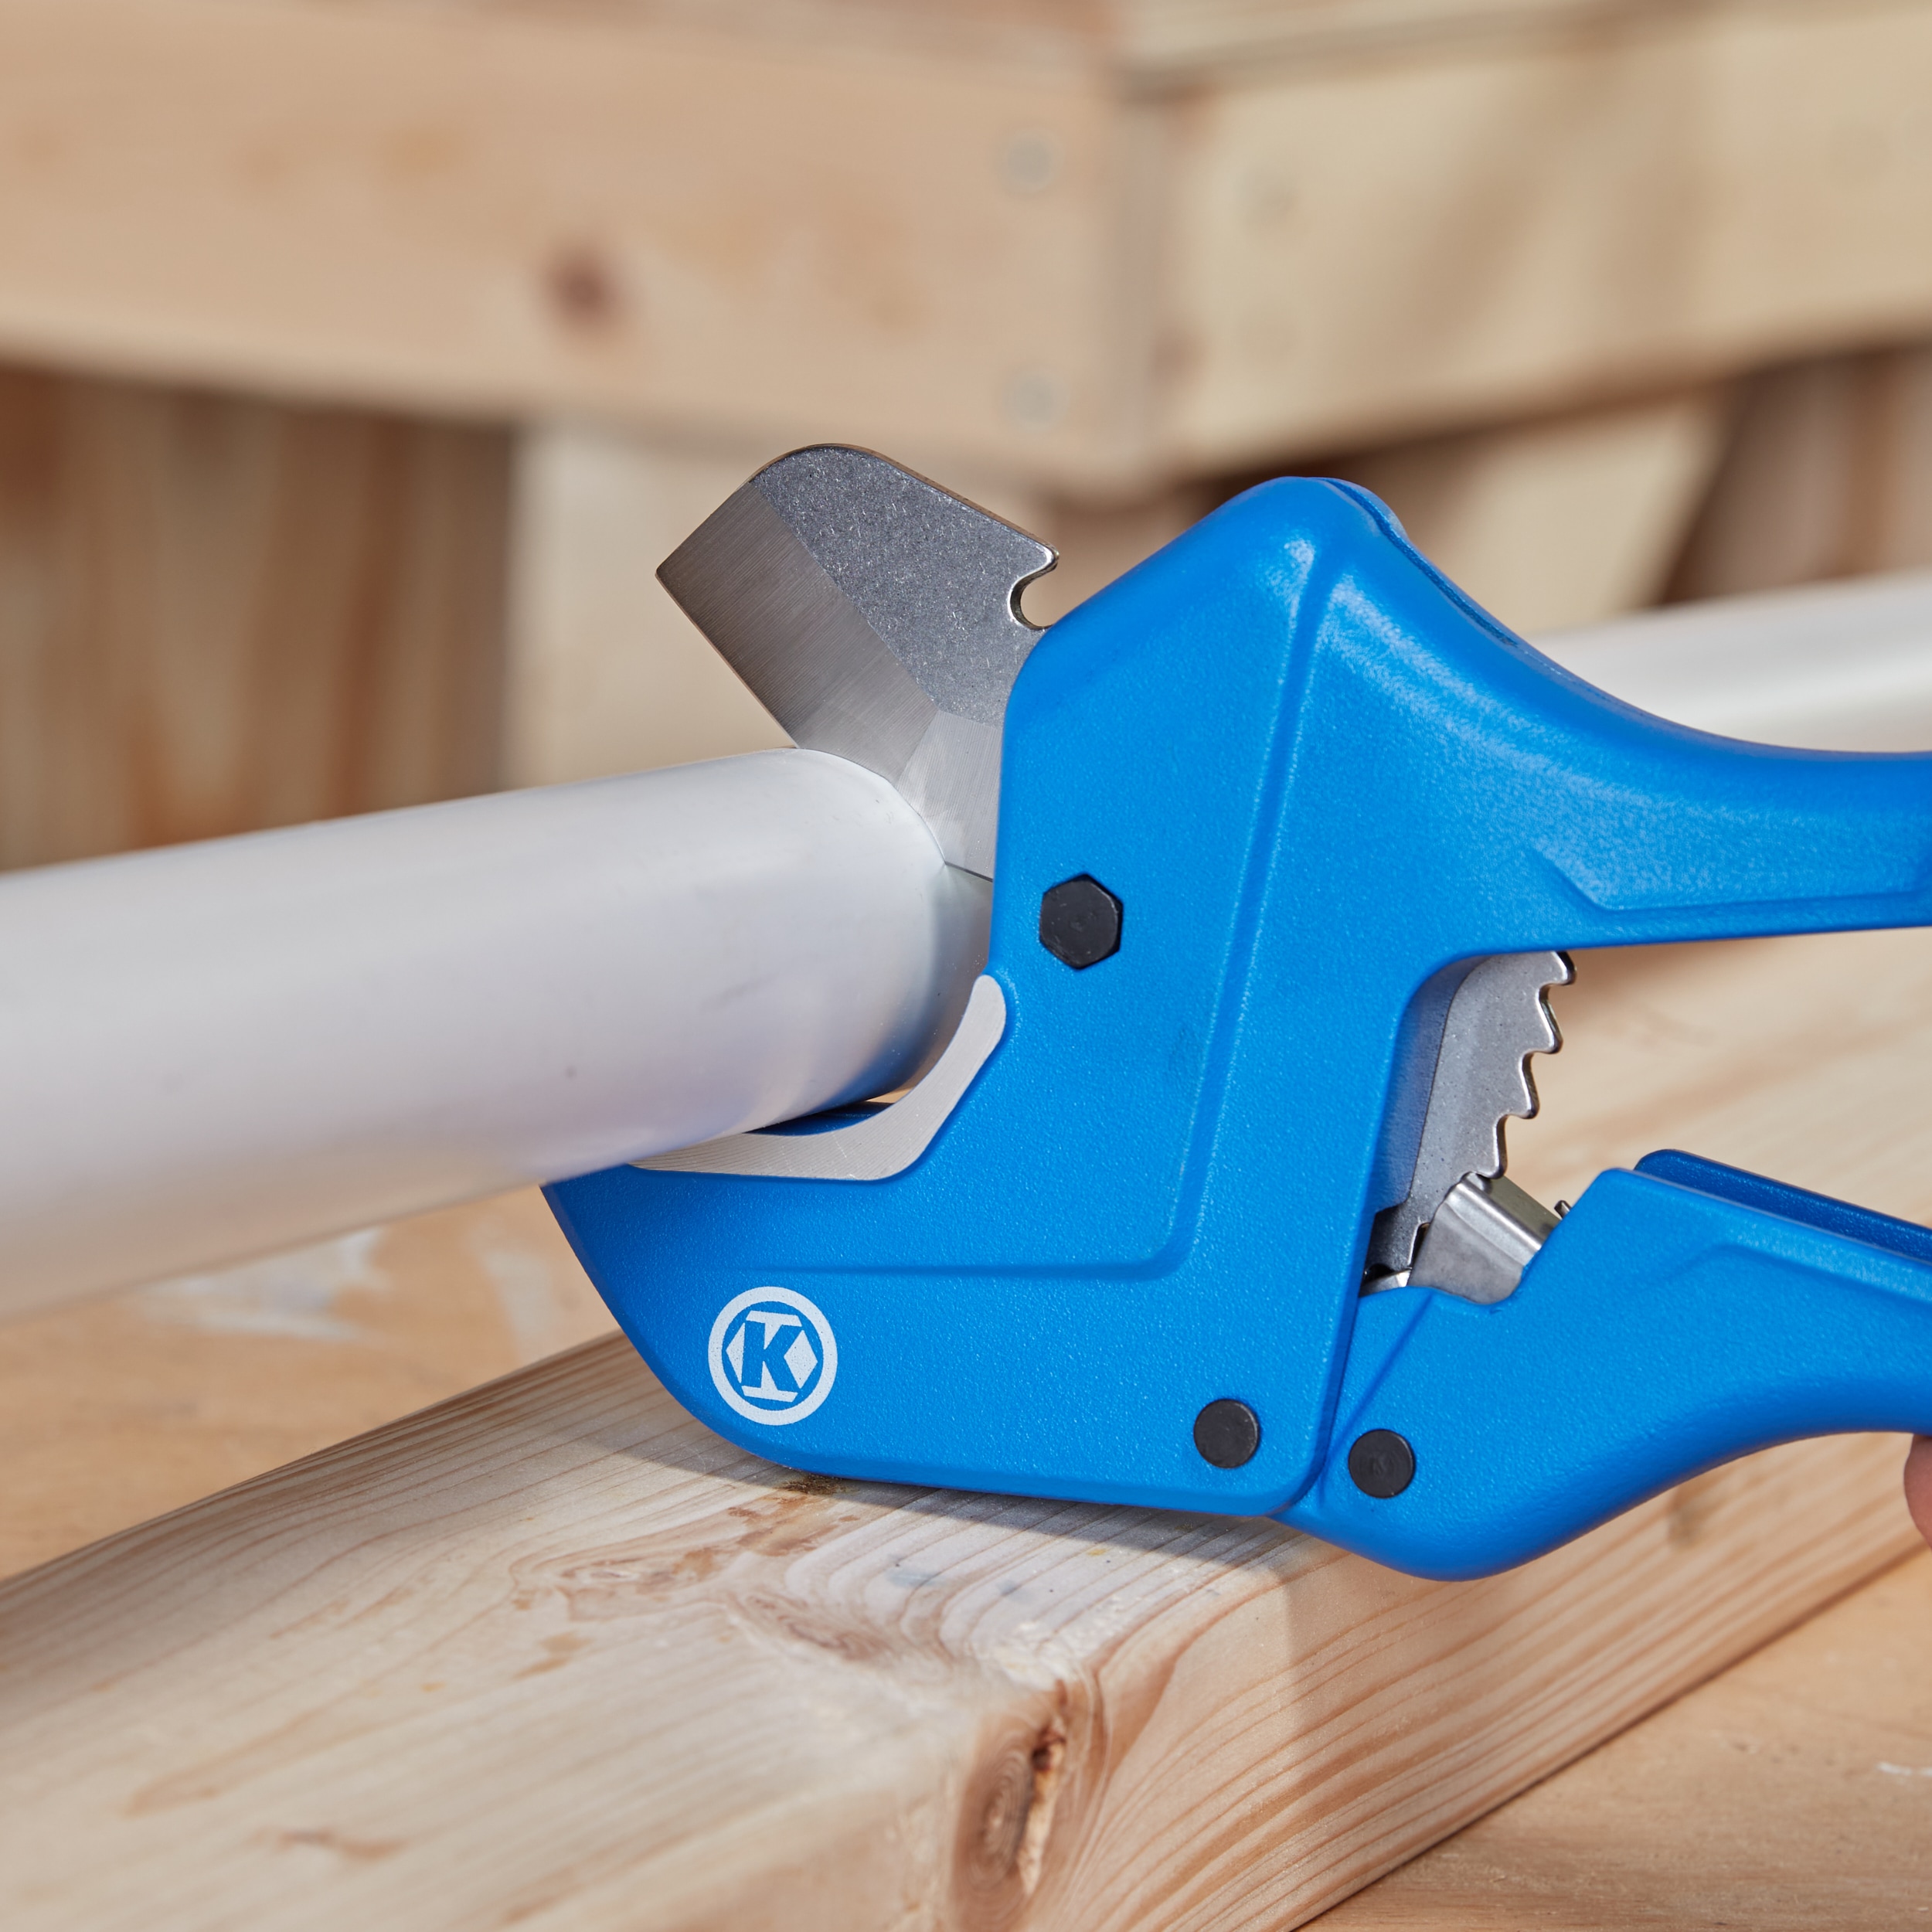 PVC Cutter, Up to 2-1/2, PVC Pipe Cutter 2 Inch, ABS Pipe Cutter, Ratchet  Pipe Cutter Heavy-Duty, Pex Cutting Tool, PEX Pipe Cutter for Cutting PEX,  PVC, PPR Plastic Hoses and Plumbing